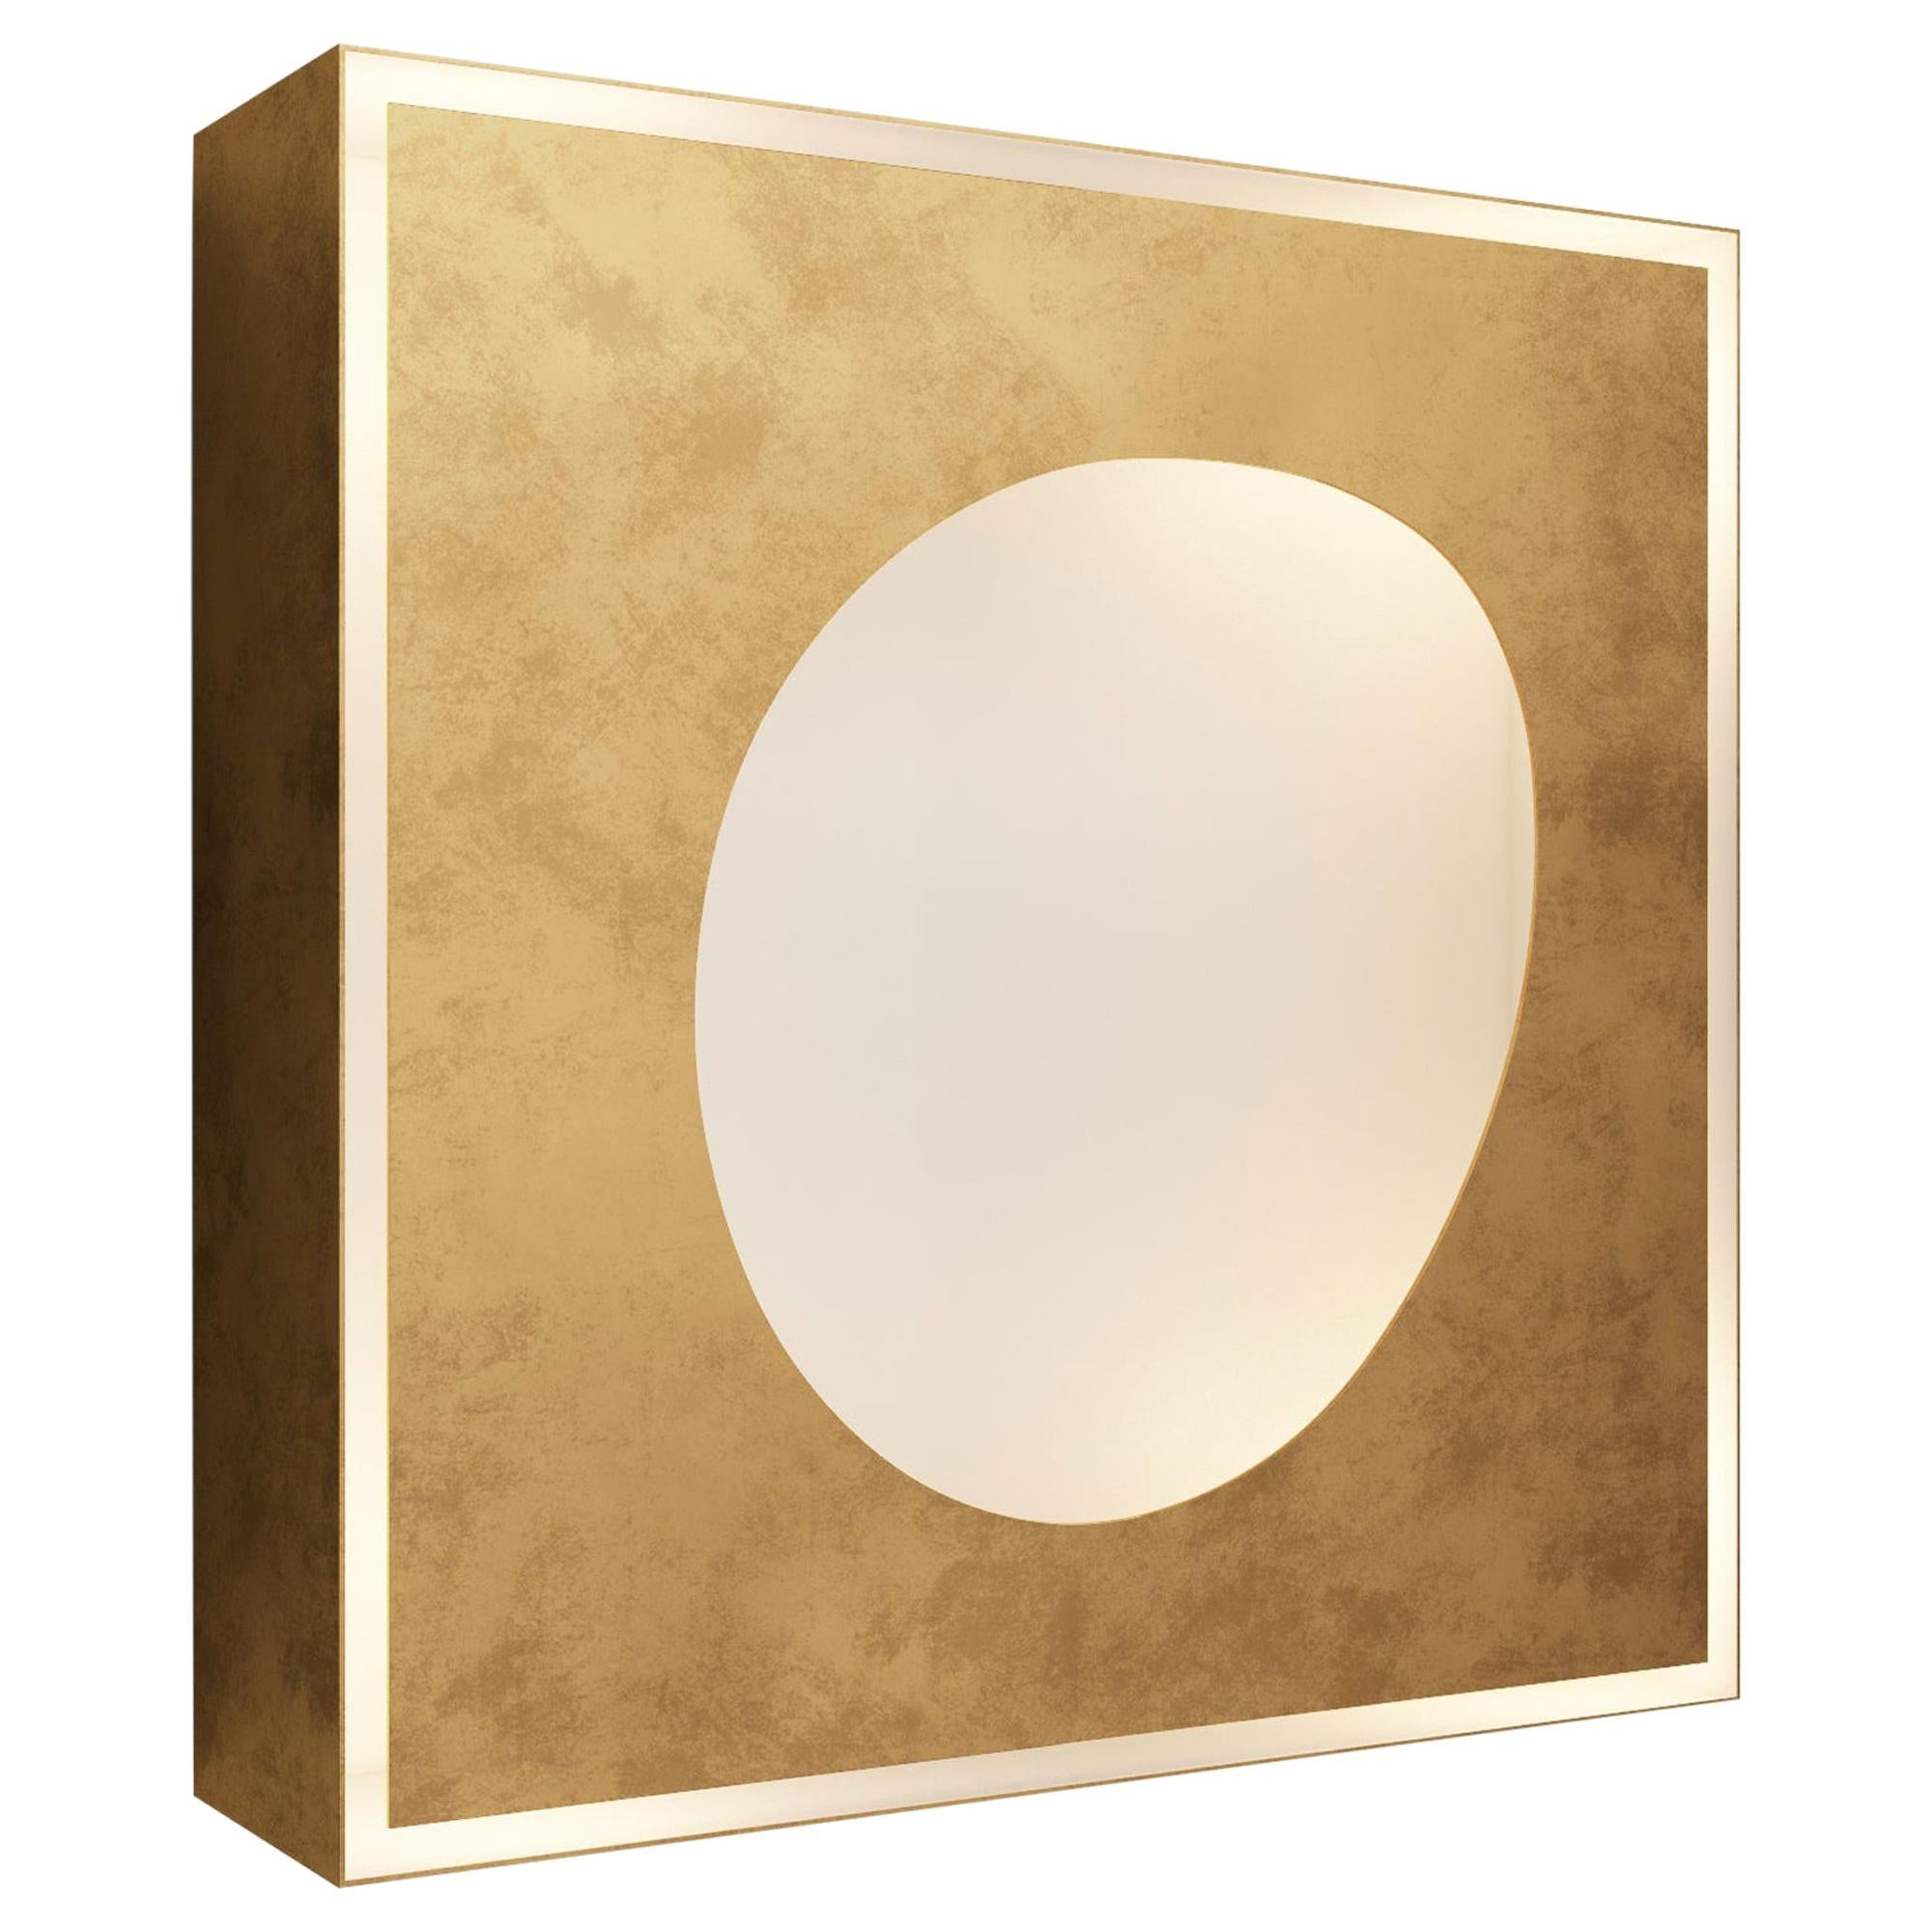 Wall Sconce FC01 Florencia Costa Light Bronzed Brass Italy 2020 Limited Edition